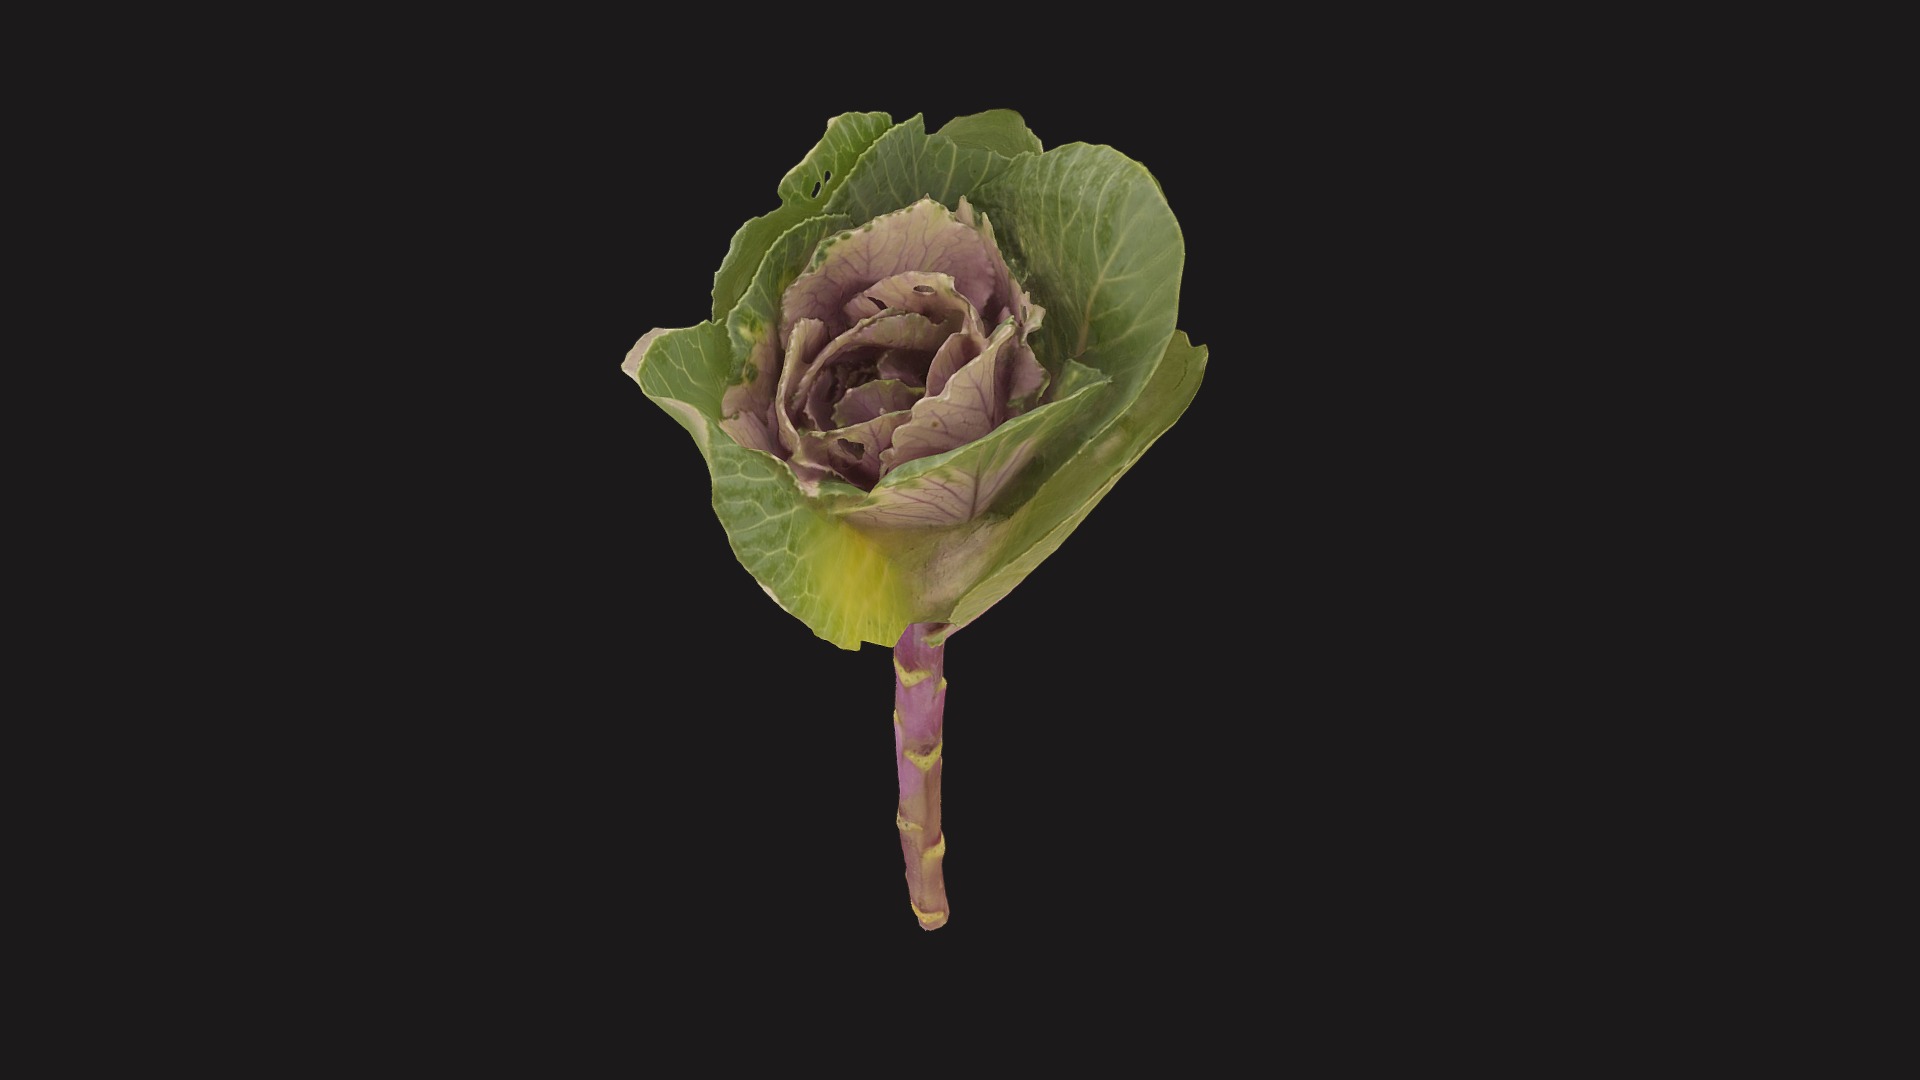 3D model Fw21 – Cabbage Flower - This is a 3D model of the Fw21 - Cabbage Flower. The 3D model is about a plant with a flower.